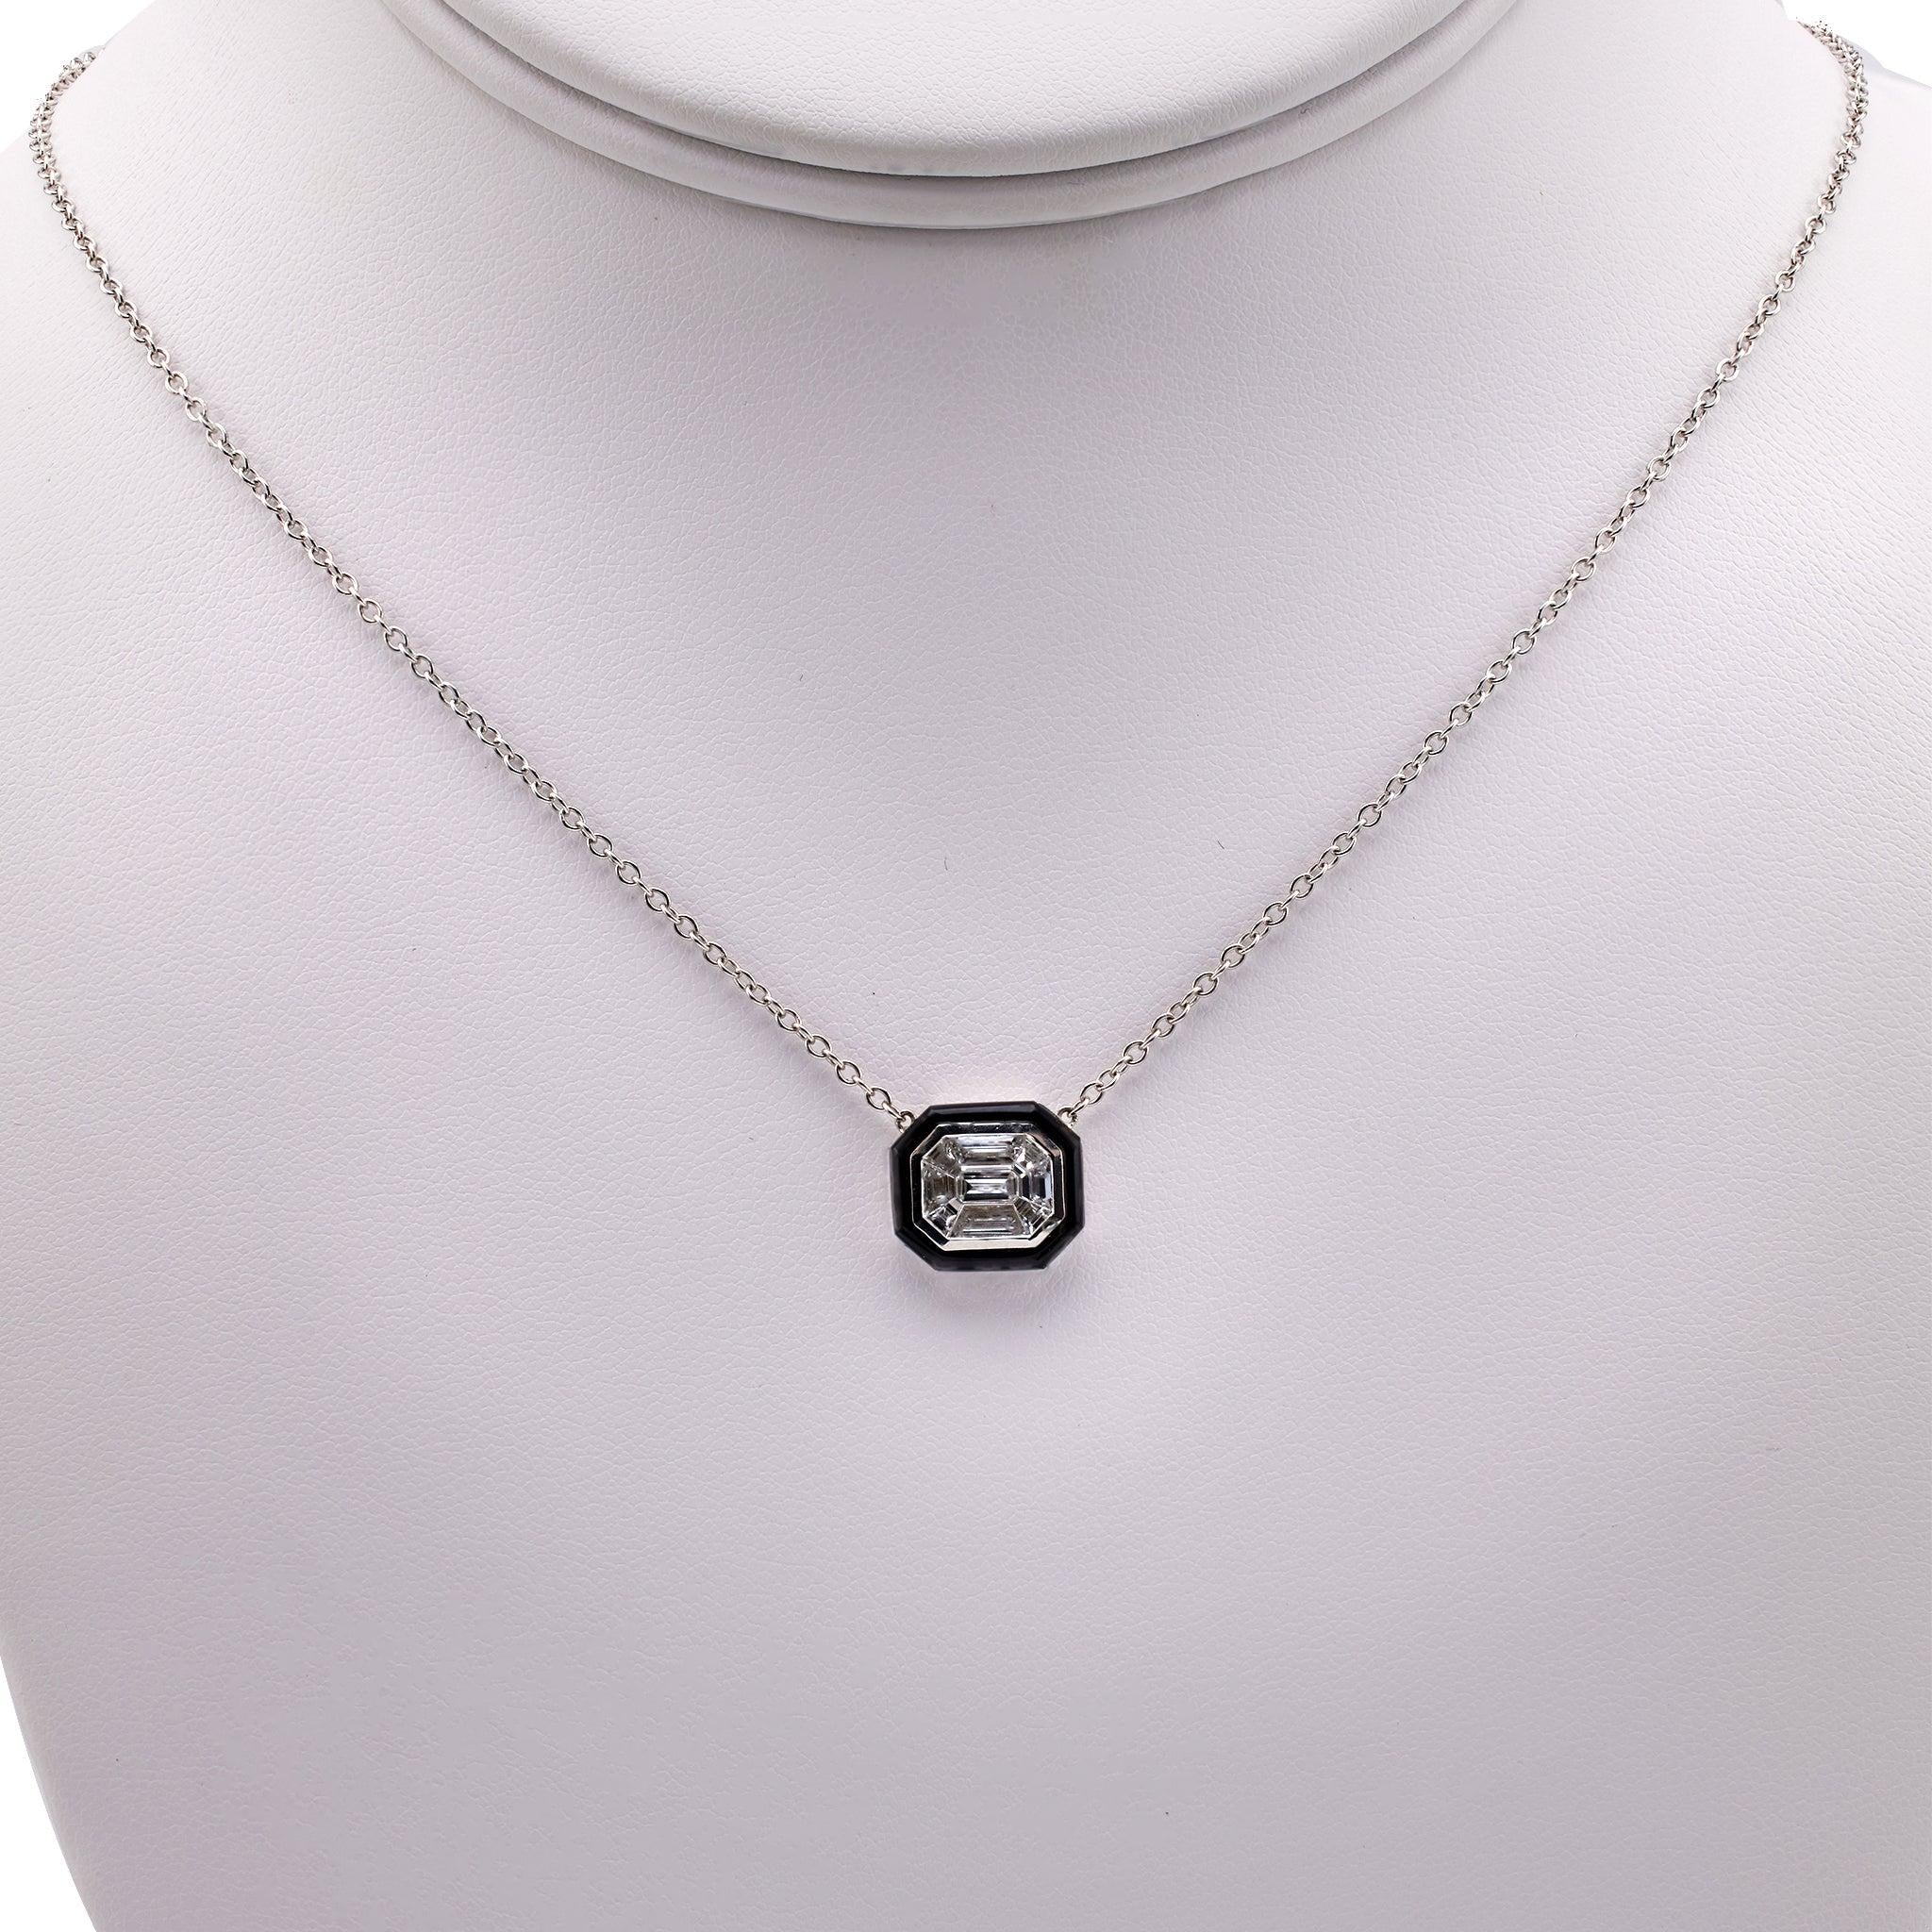 0.63 Carat Total Weight Diamond Onyx 18k White Gold Pendant Necklace  Jack Weir & Sons   